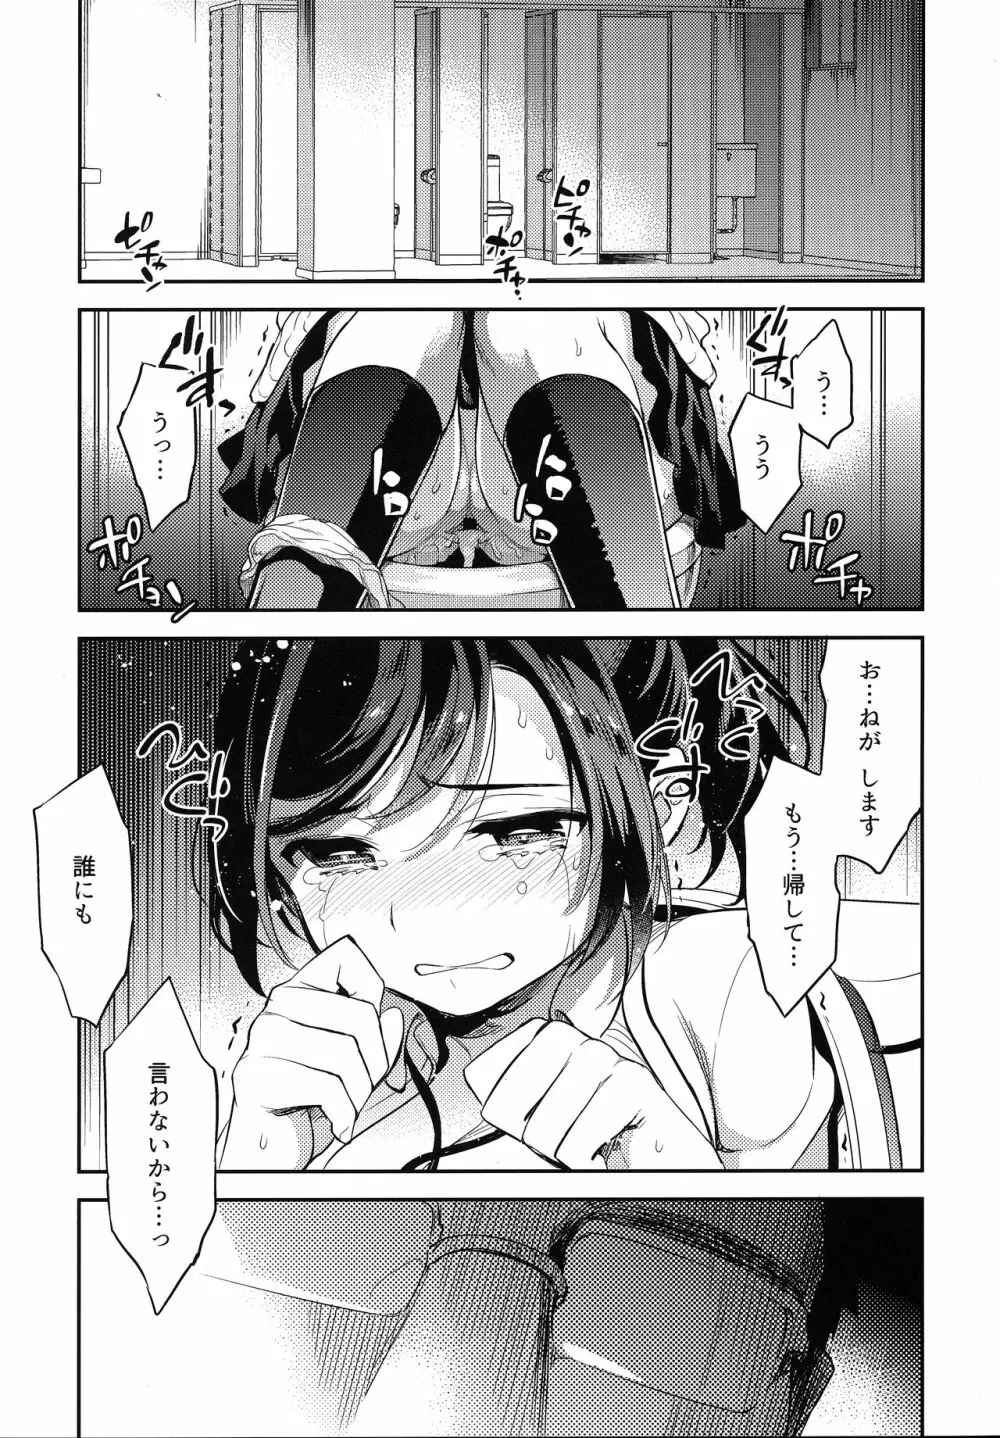 C9-42 小百合 2 少女は駅のトイレで犯される - page4